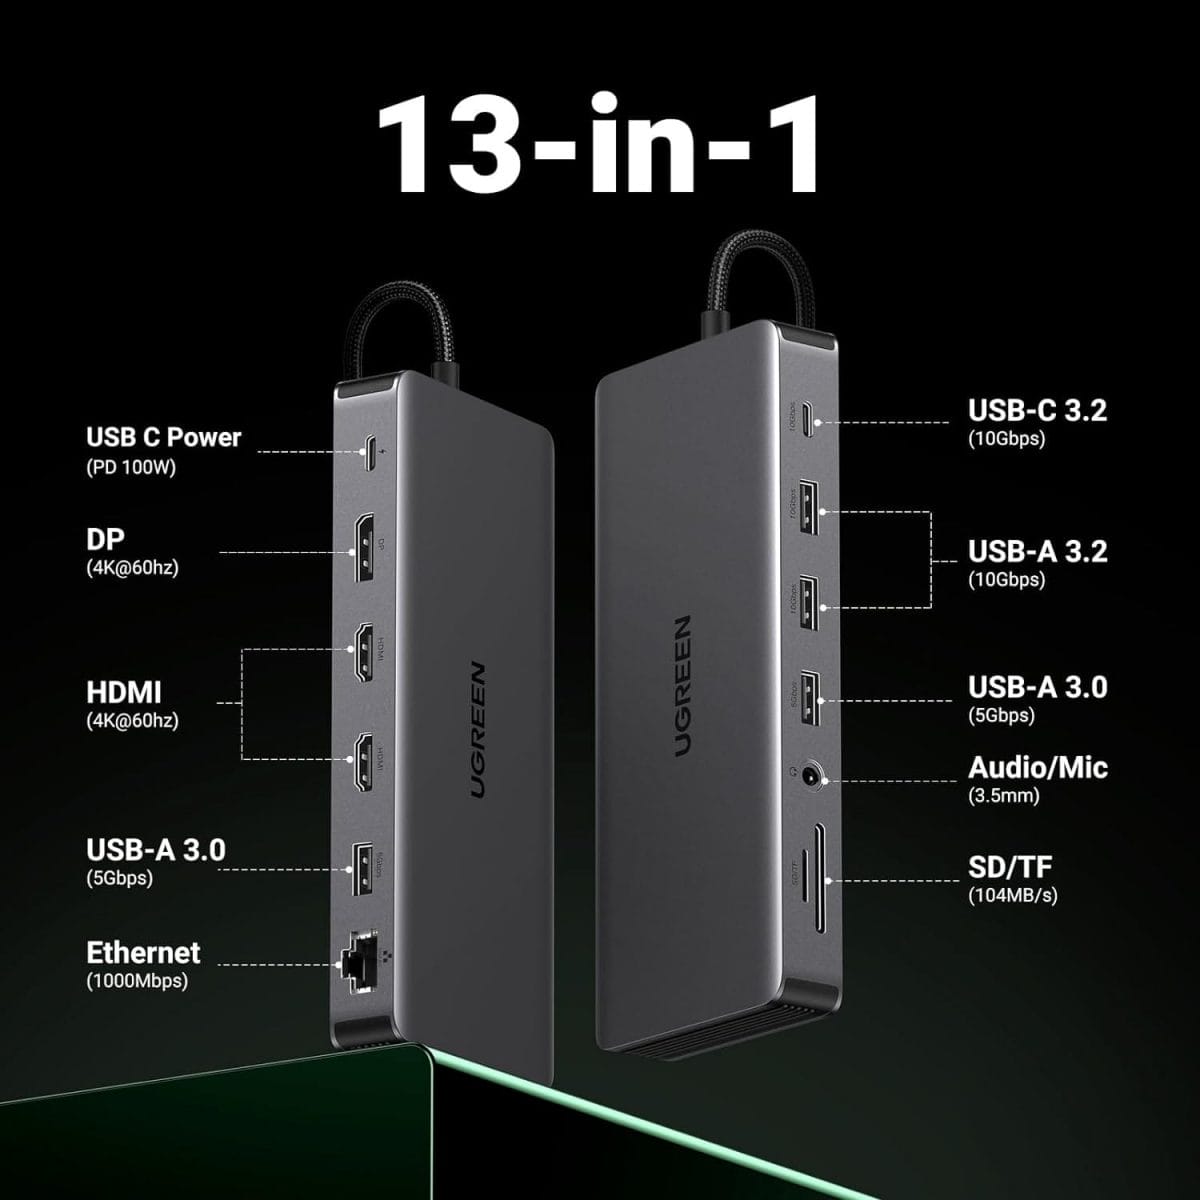 Image shows the ports of the UGREEN Revodok Pro 313.